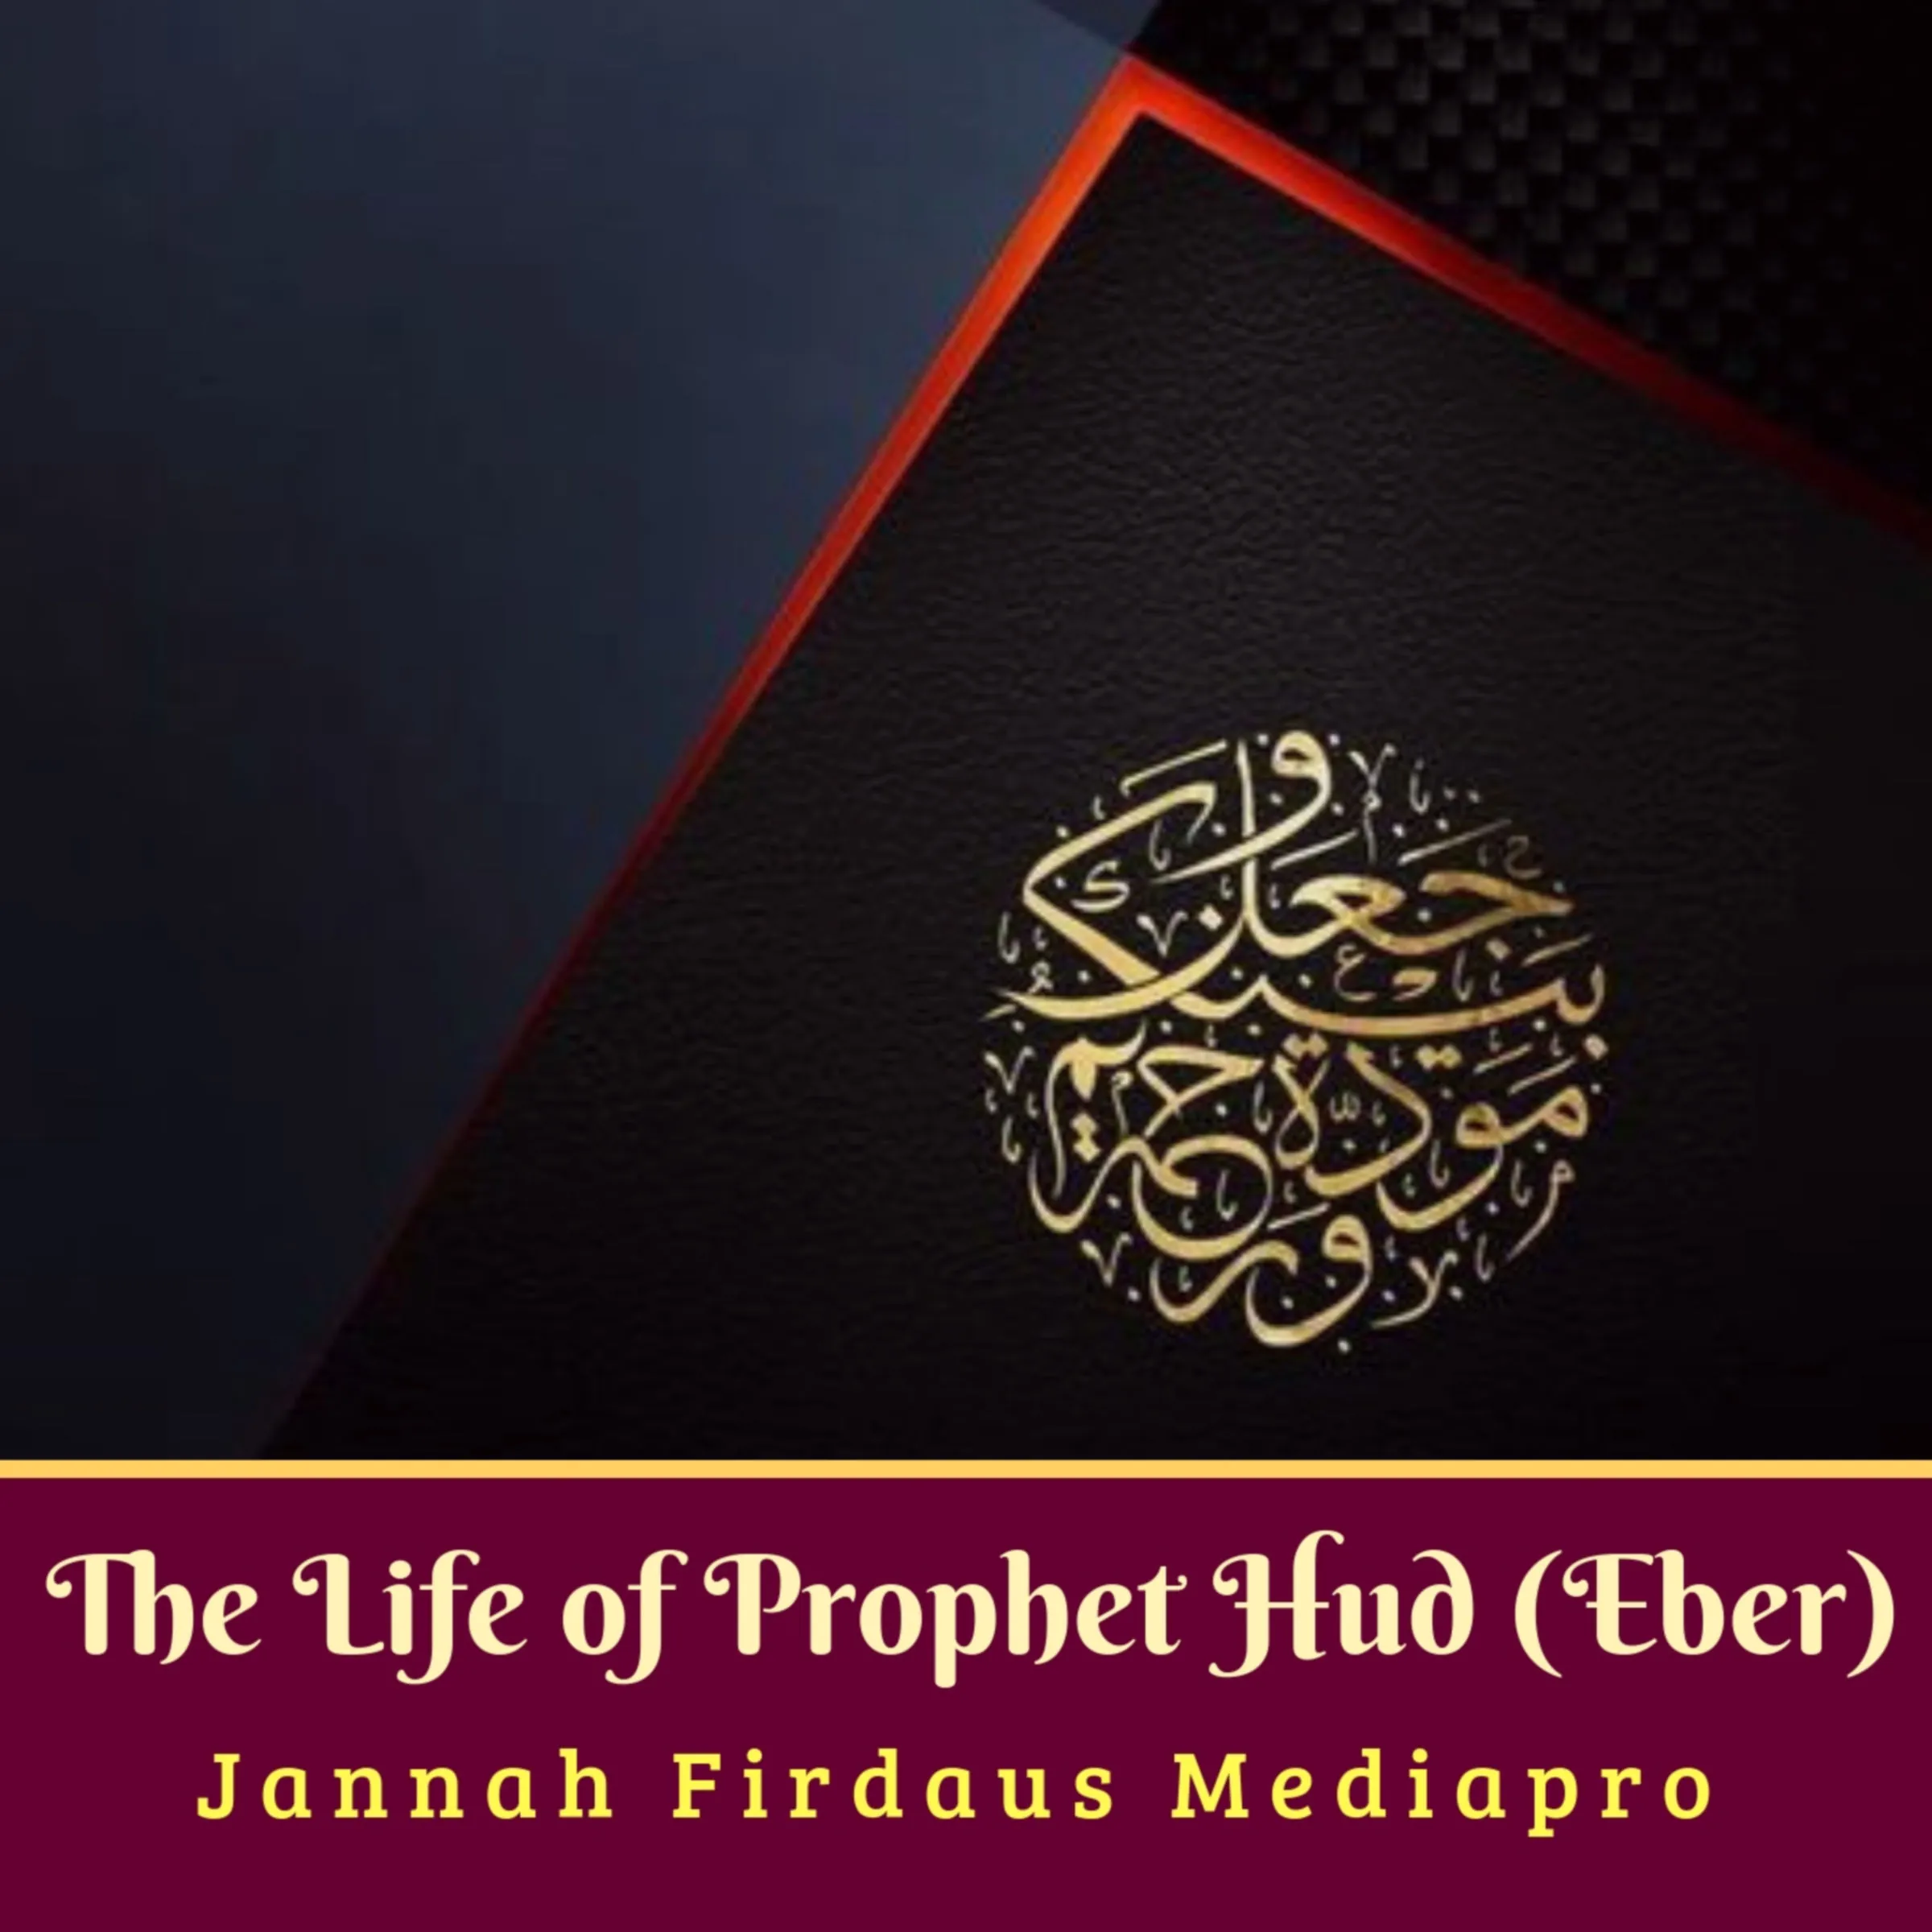 The Life of Prophet Hud (Eber) by Jannah Firdaus Mediapro Audiobook